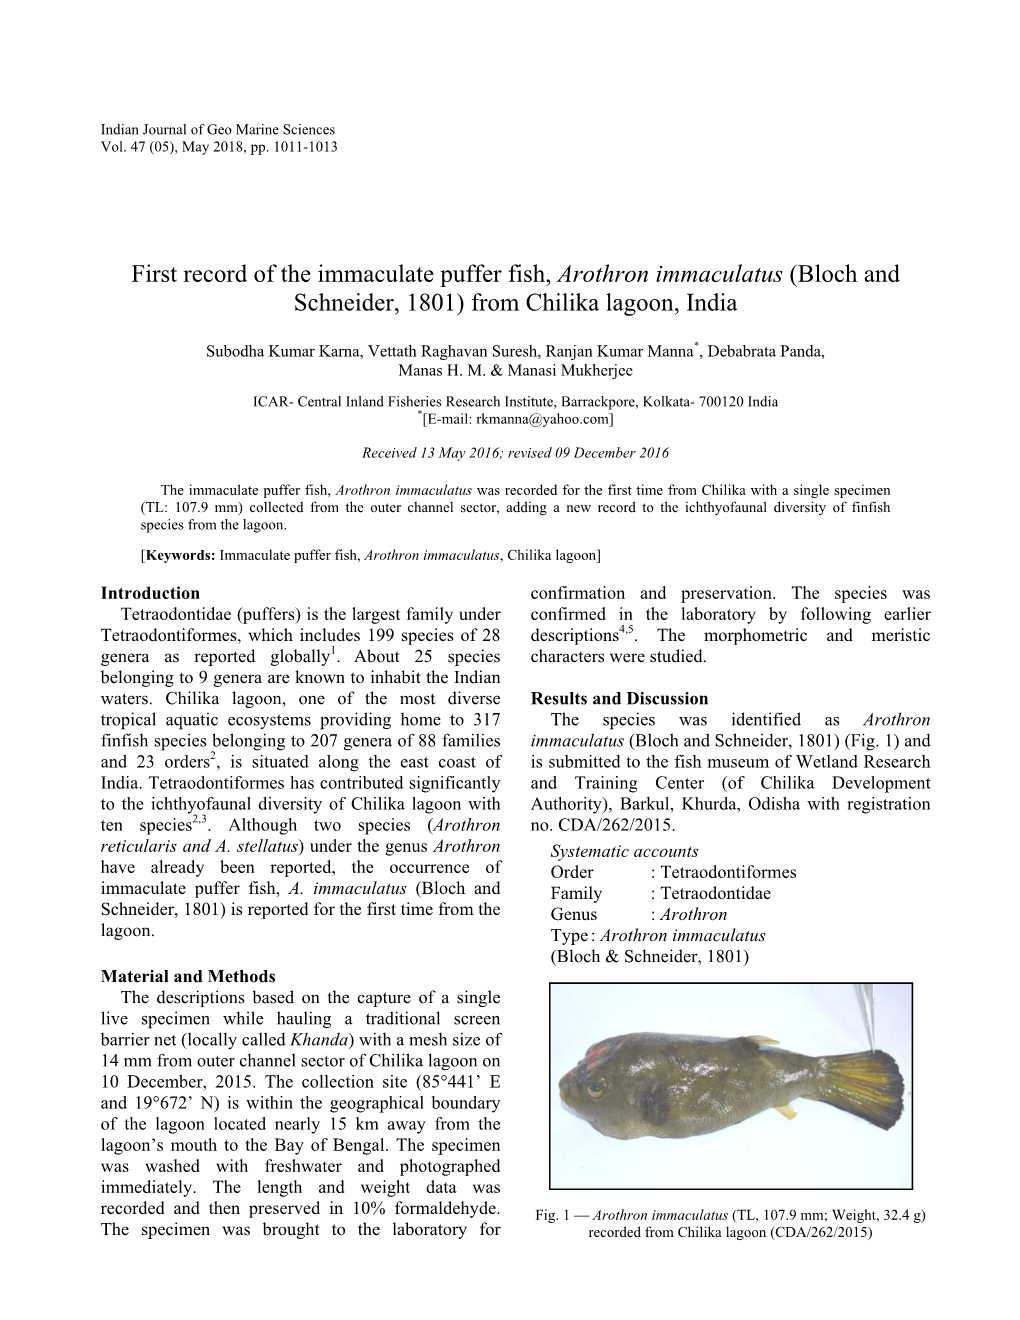 First Record of the Immaculate Puffer Fish, Arothron Immaculatus (Bloch and Schneider, 1801) from Chilika Lagoon, India